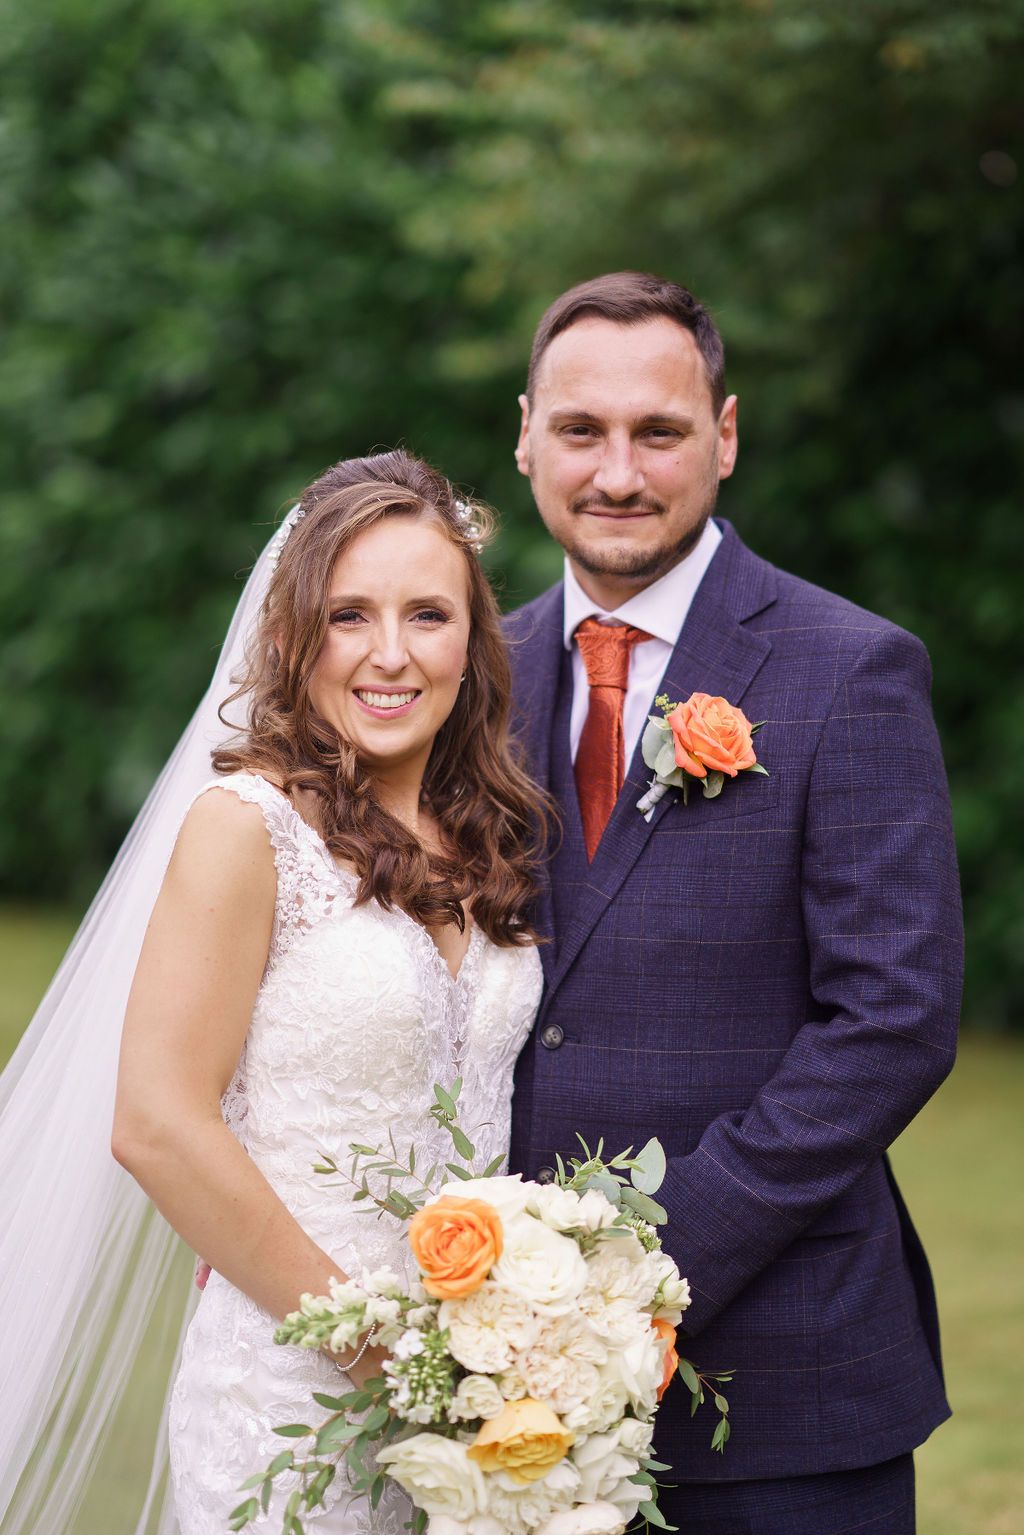 Bex and Dan stand together as newlyweds. Bex holding her bridal bouquet of flowers - photo thanks to J Bidmead Photography